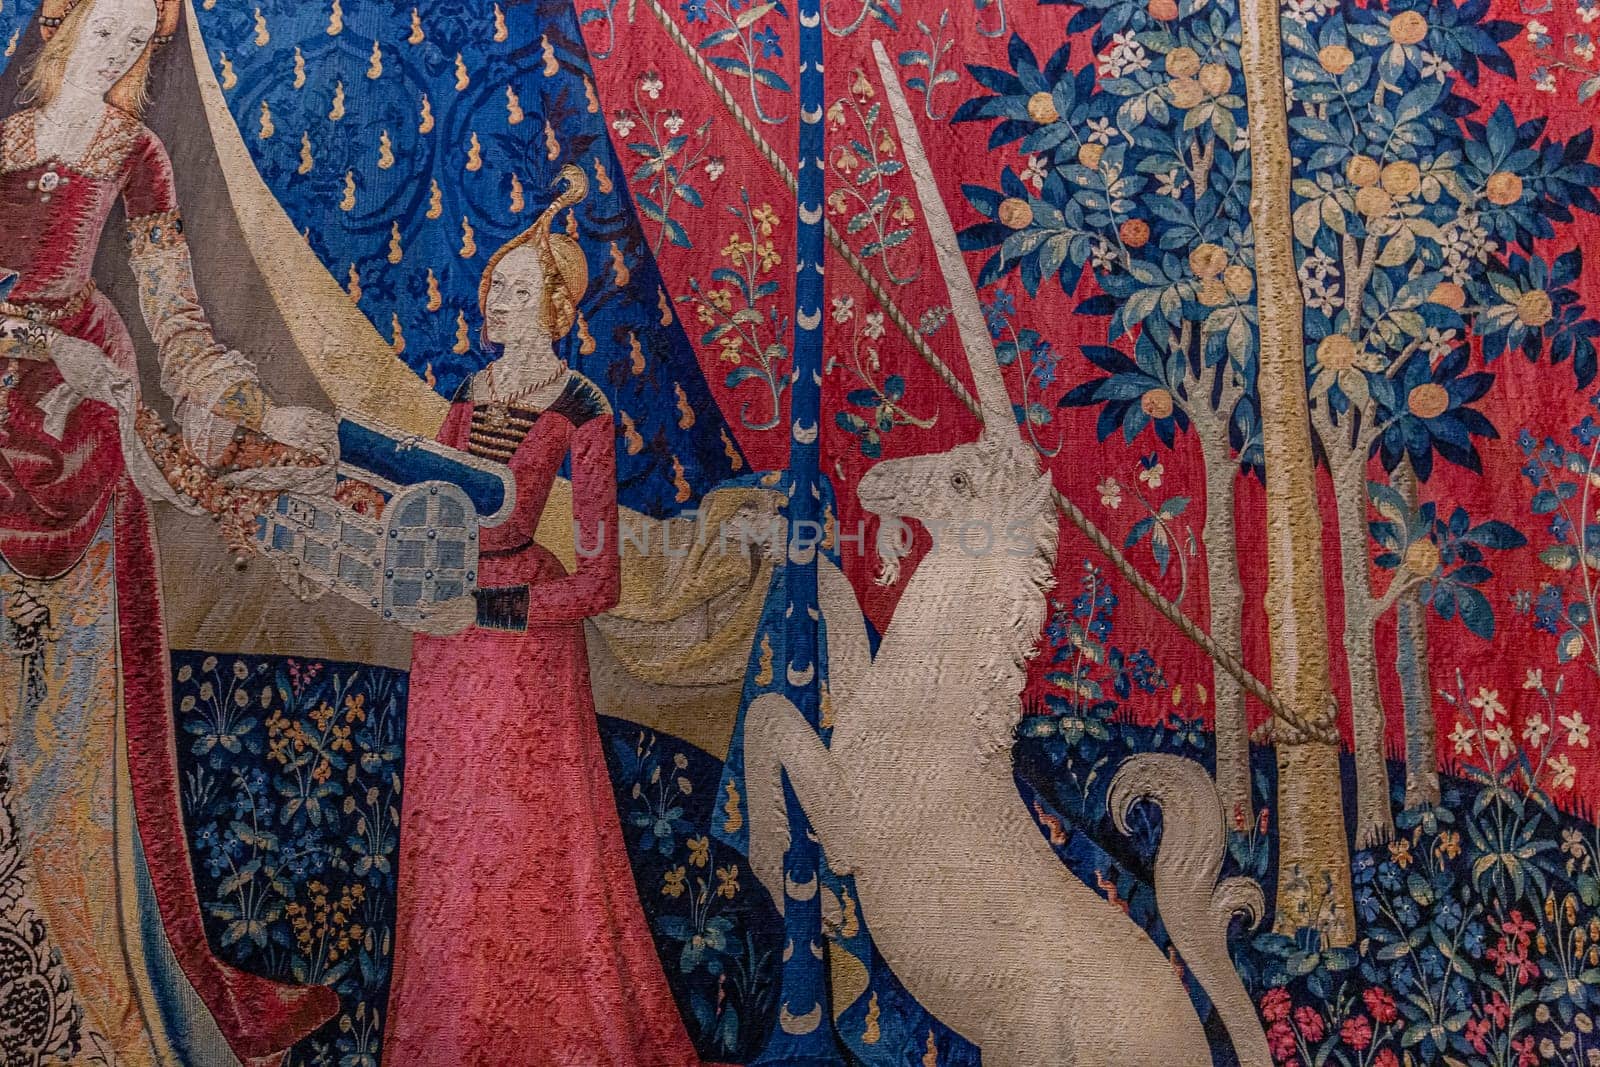 The lady and the unicorn tapestry, Cluny chapel, Paris, France by photogolfer